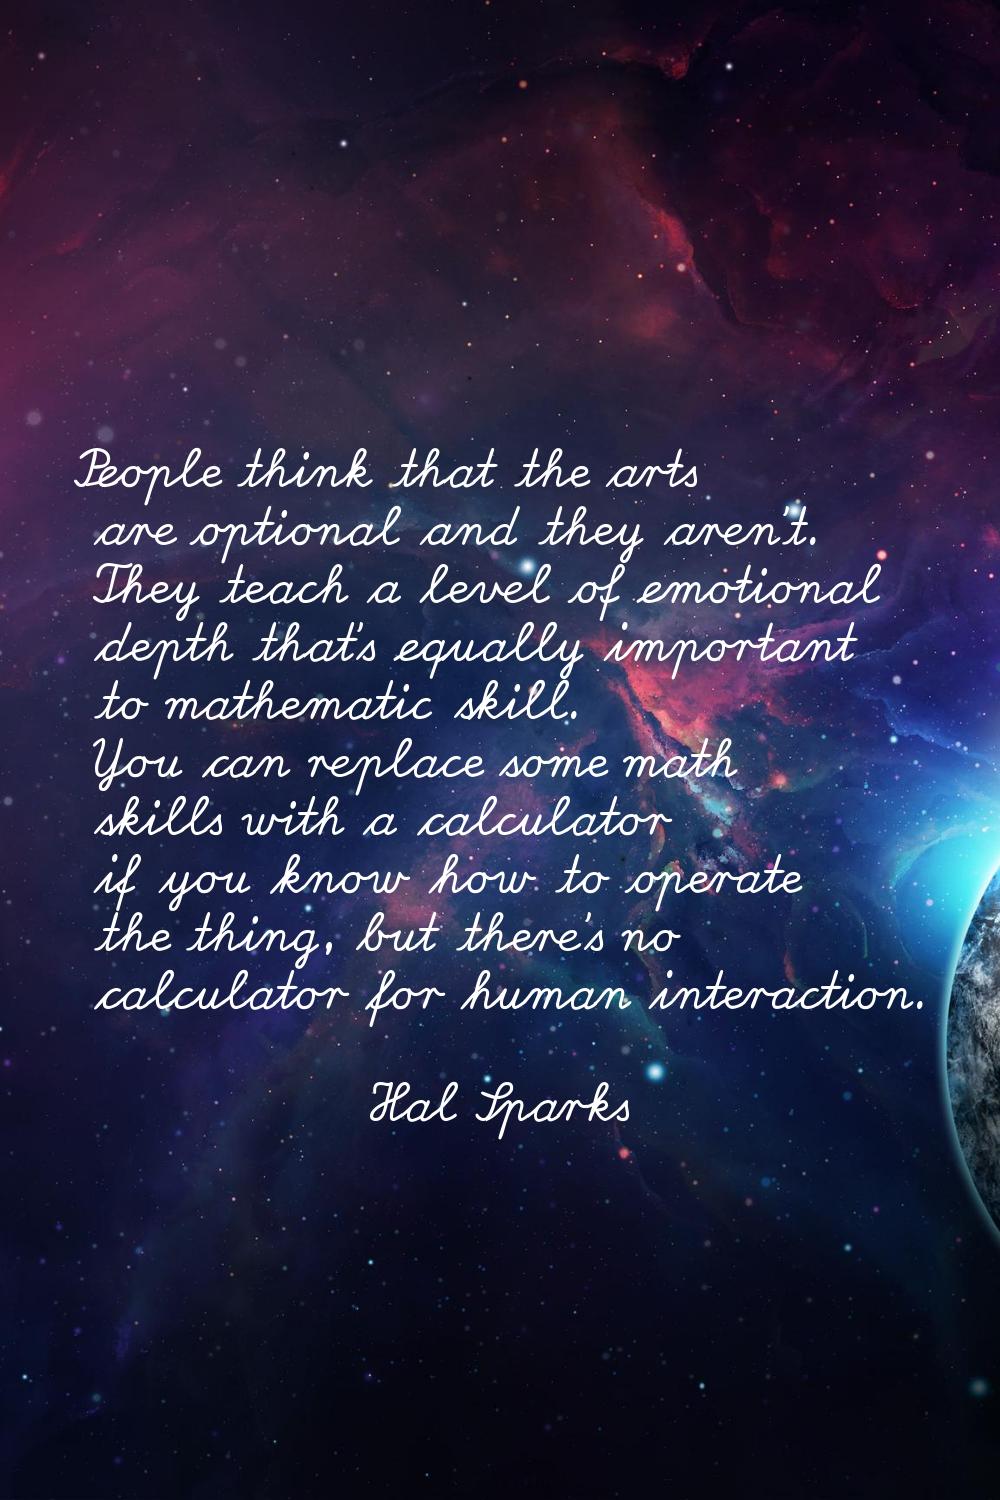 People think that the arts are optional and they aren't. They teach a level of emotional depth that